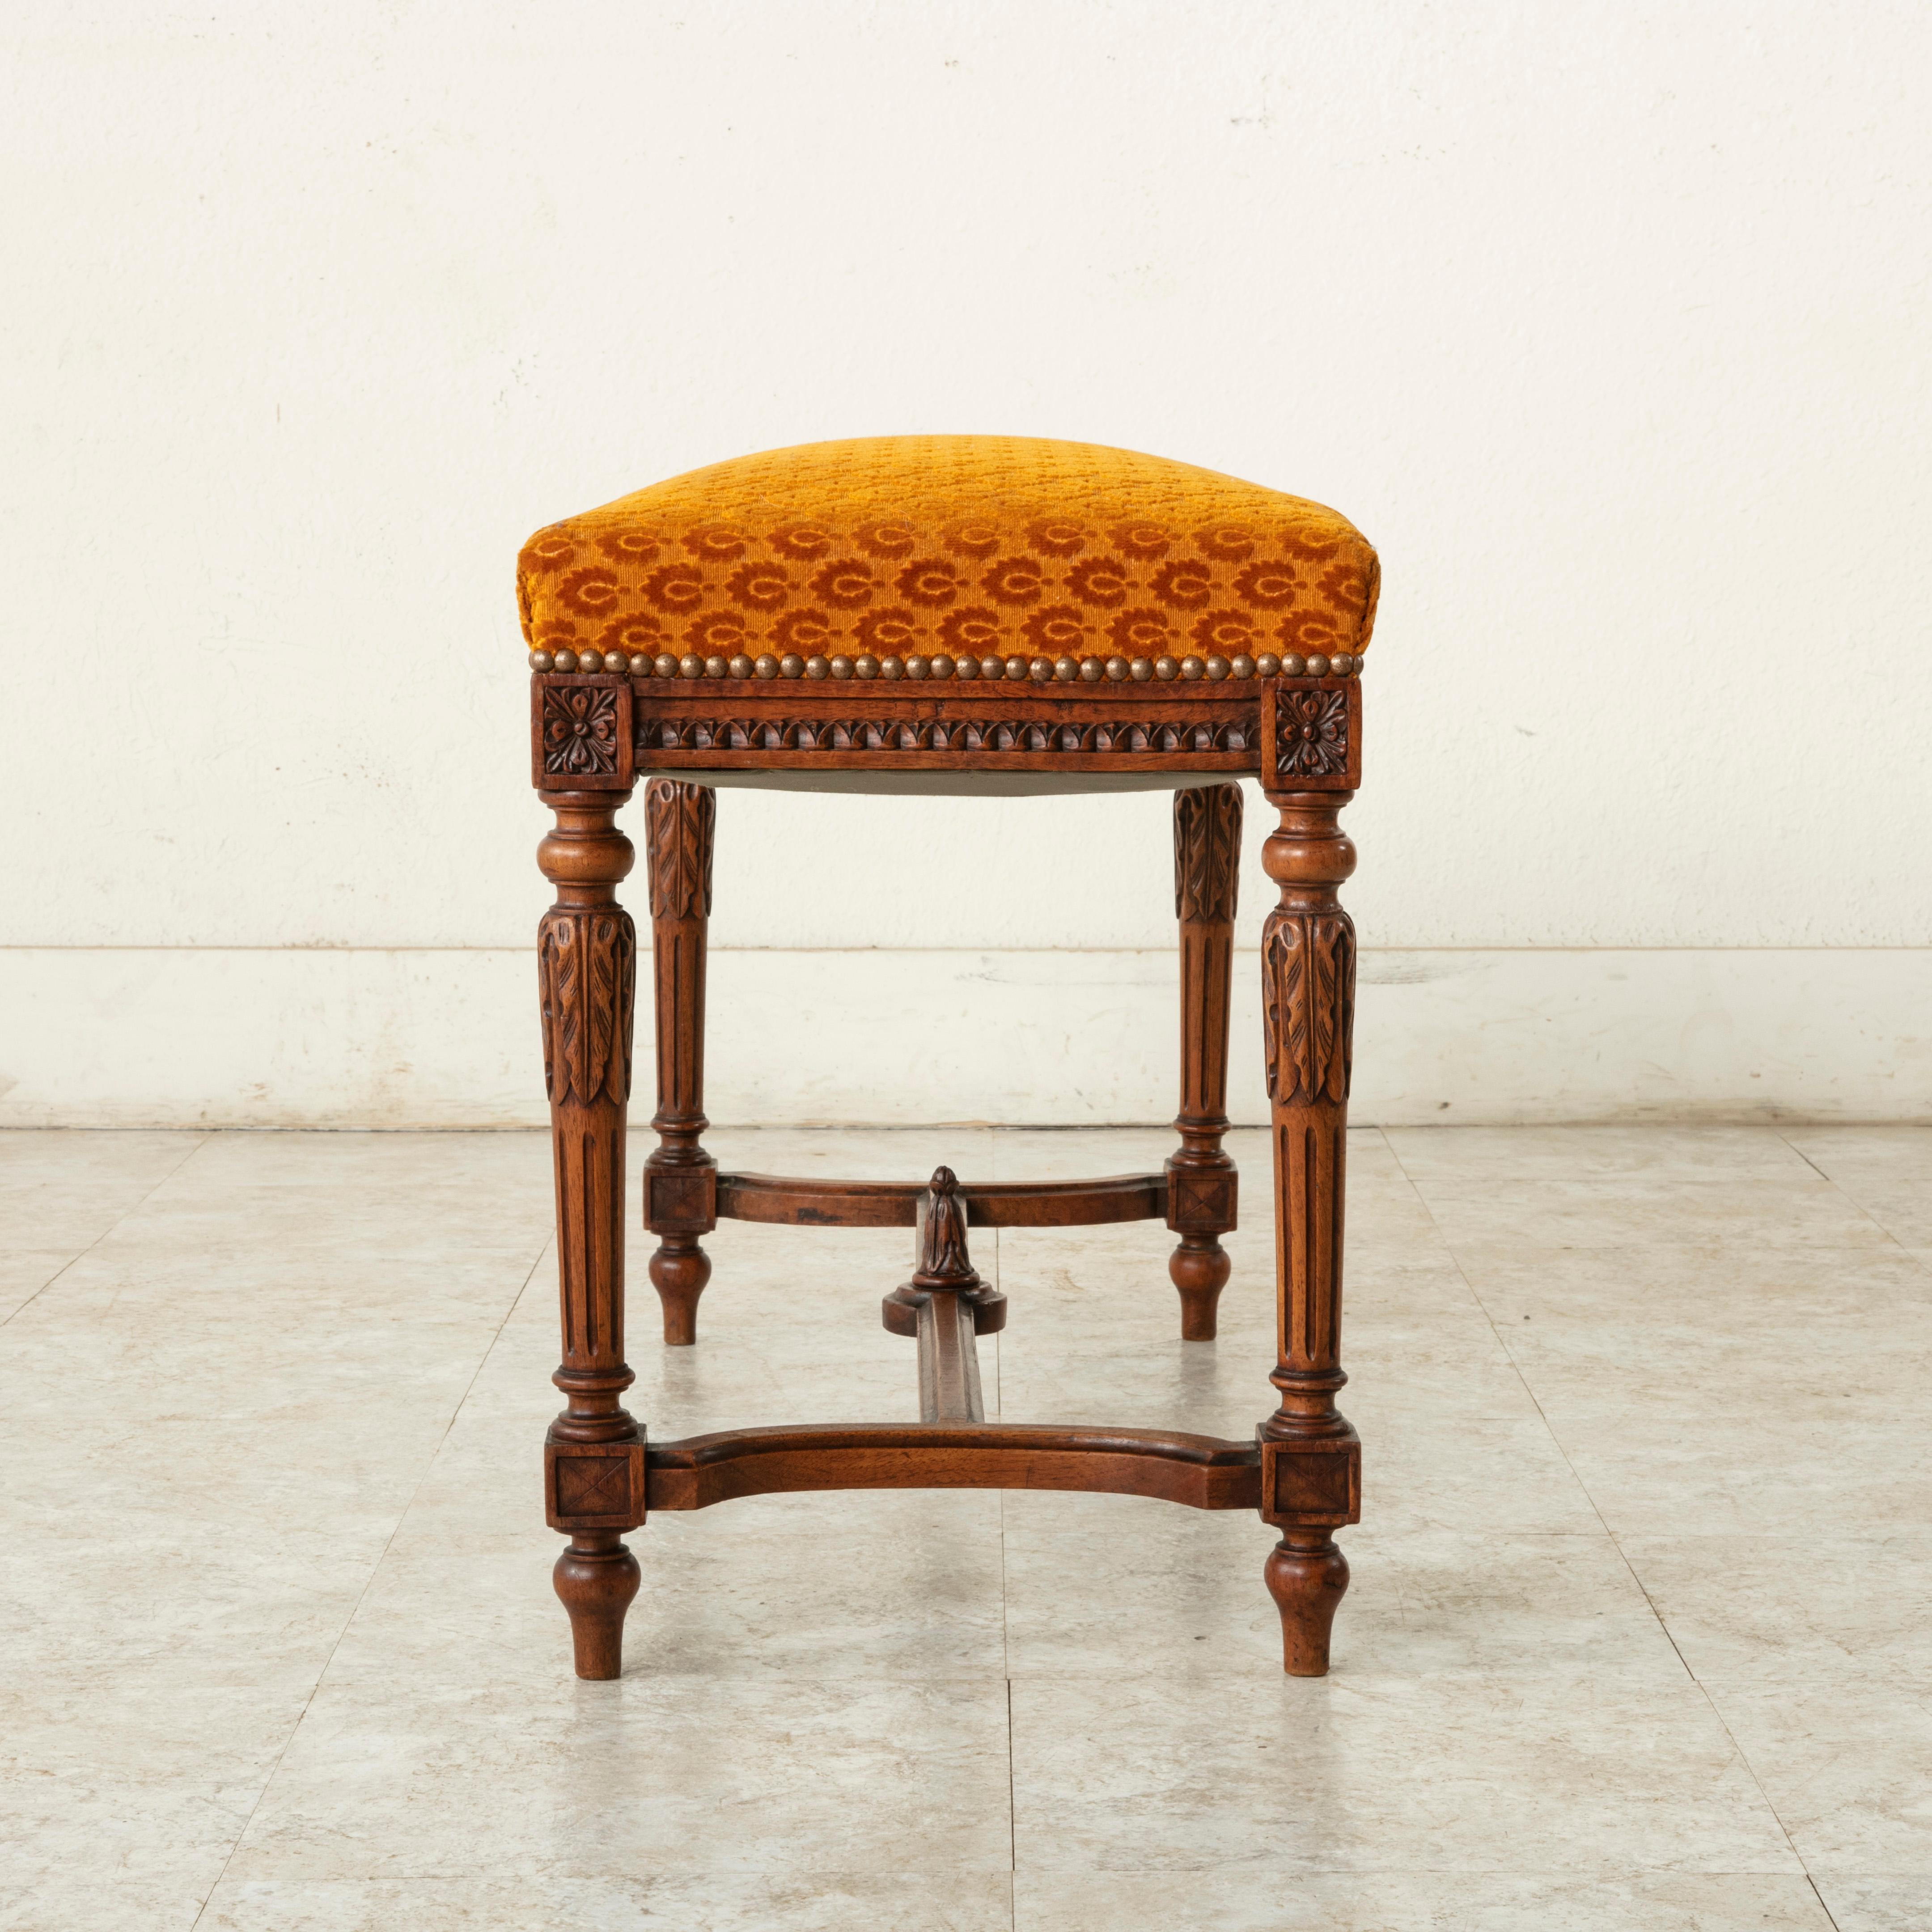 Upholstery Late 19th Century Louis XVI Style Beechwood Bench or Banquette